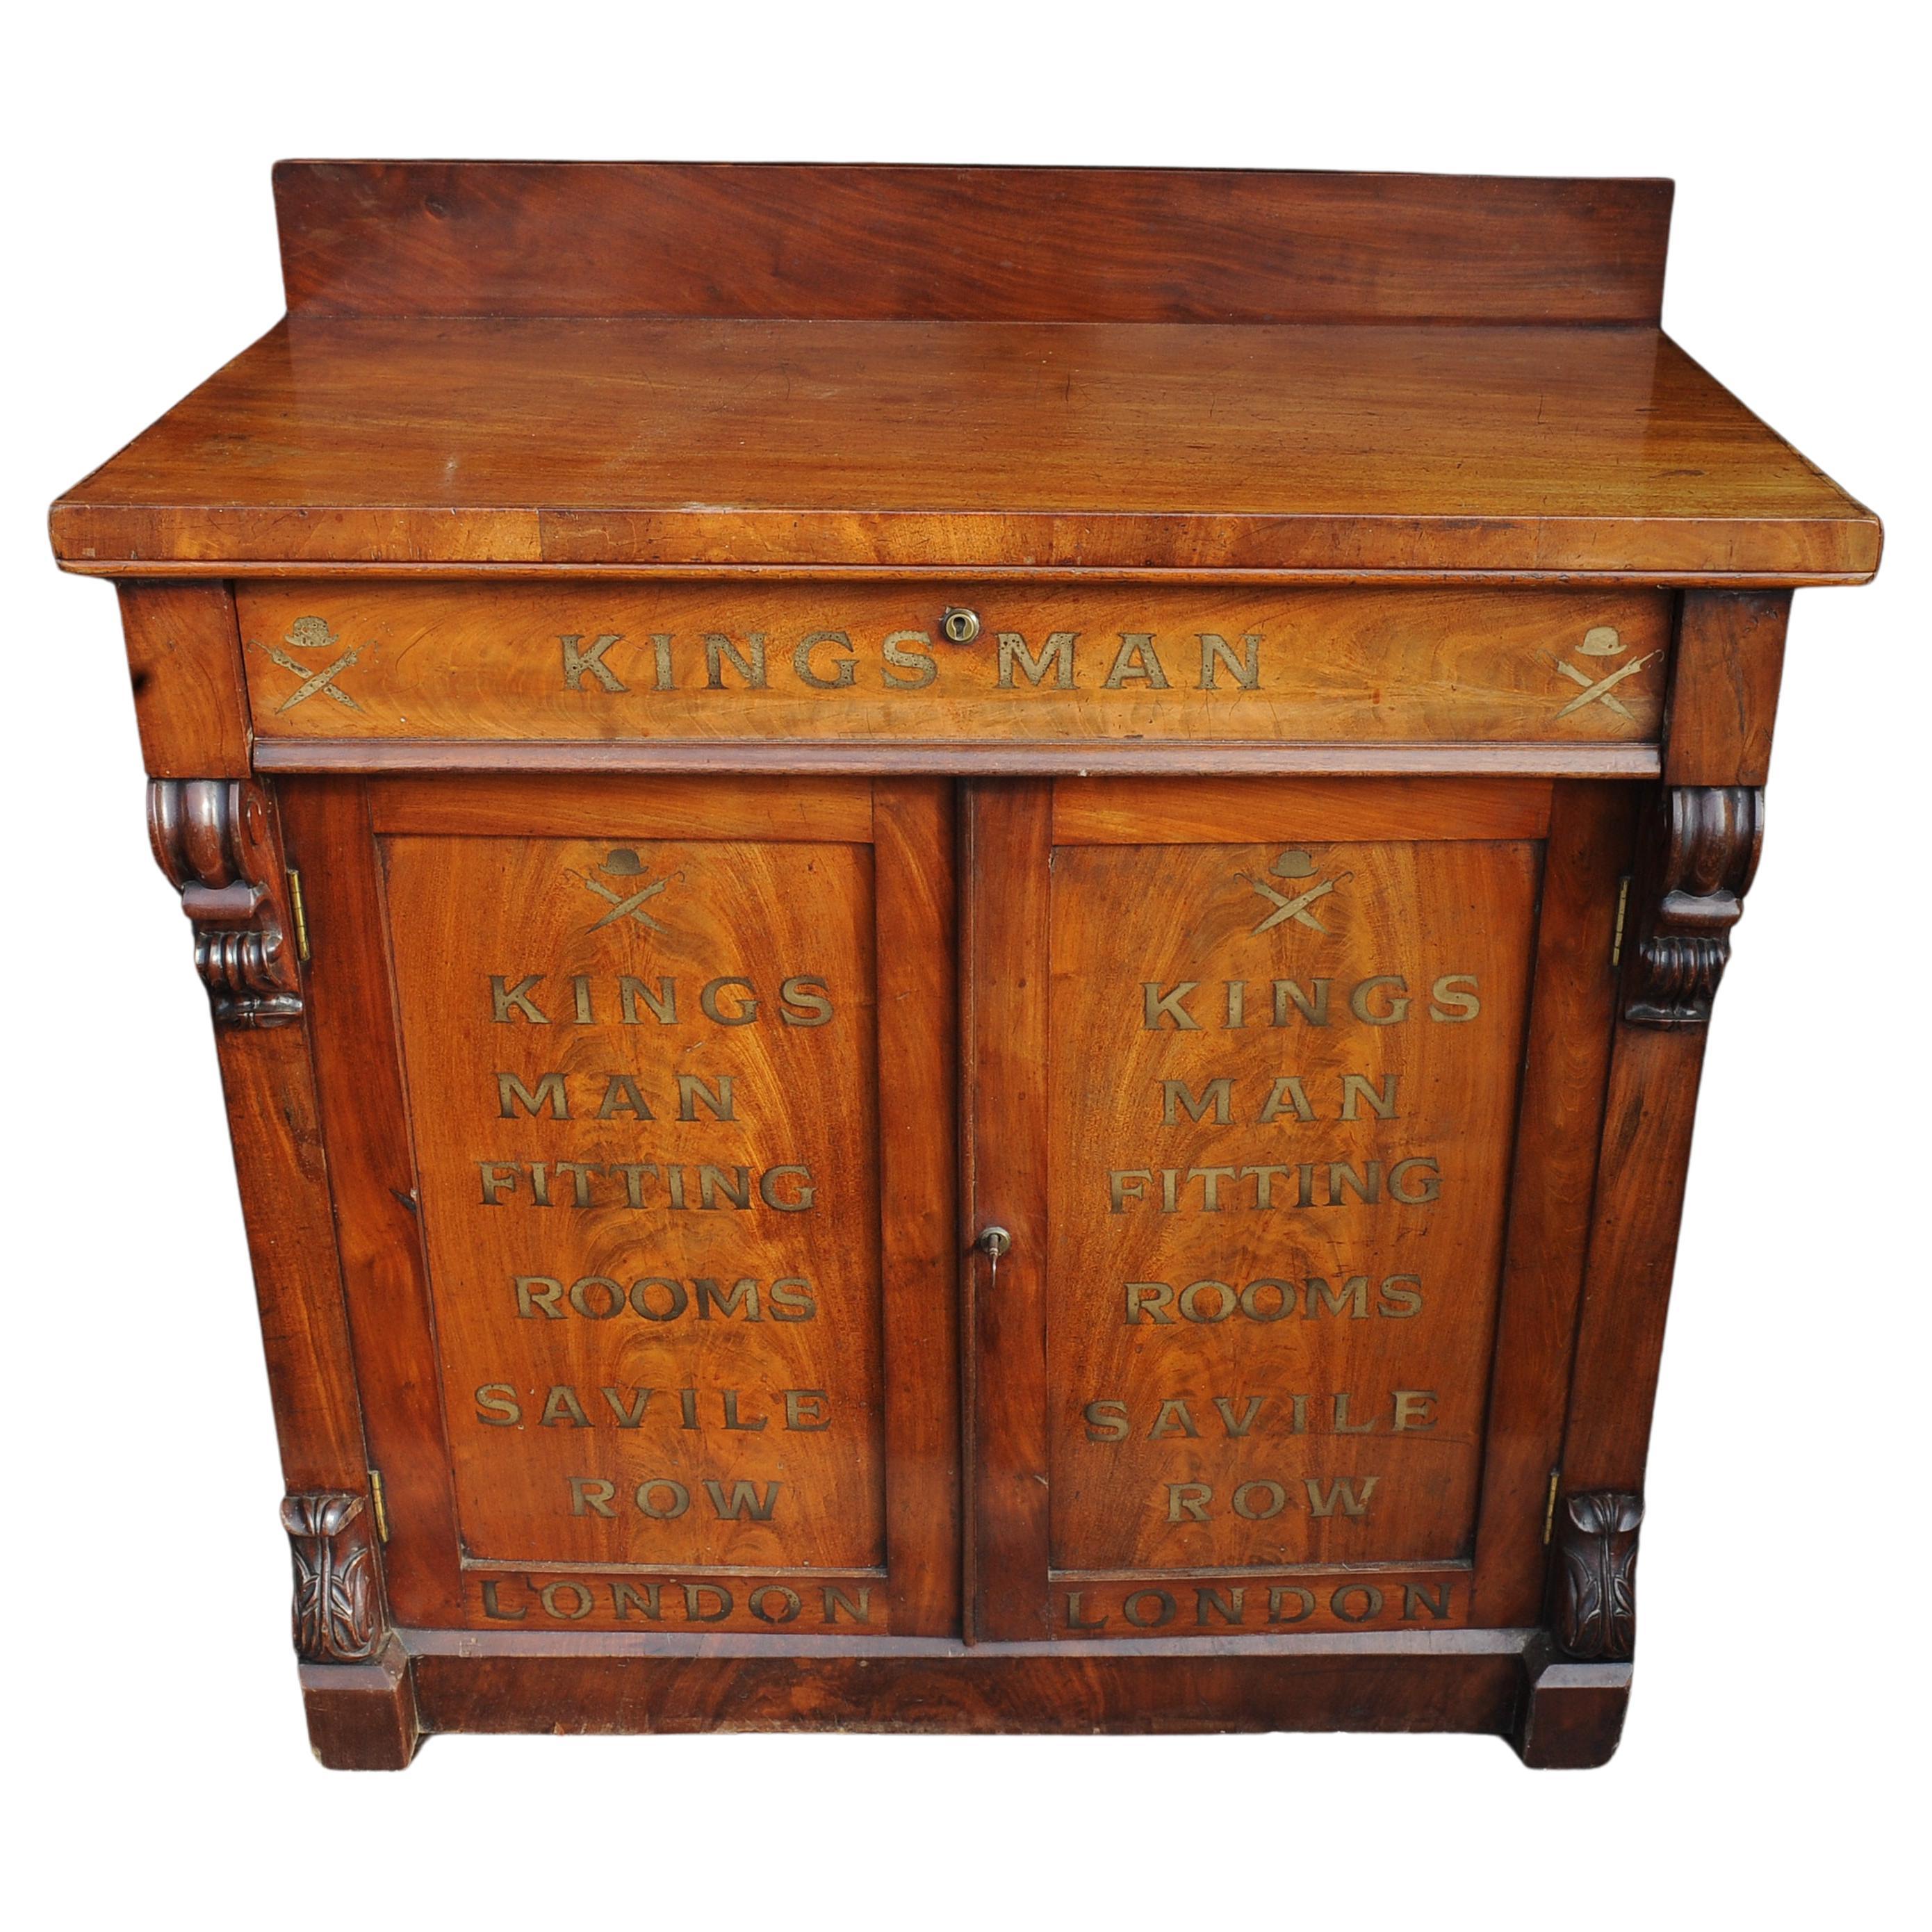 Kingsman Film Prop 19th Century Mahogany Carved & Hand Gilt Painted Chiffonier 


A 19th Century Mahogany Carved & Hand Gilt Painted Chiffonier with Kingsman Branding Prop From the Film Franchise

With Decorative Carved Pedestals, Fitted Brass Key &